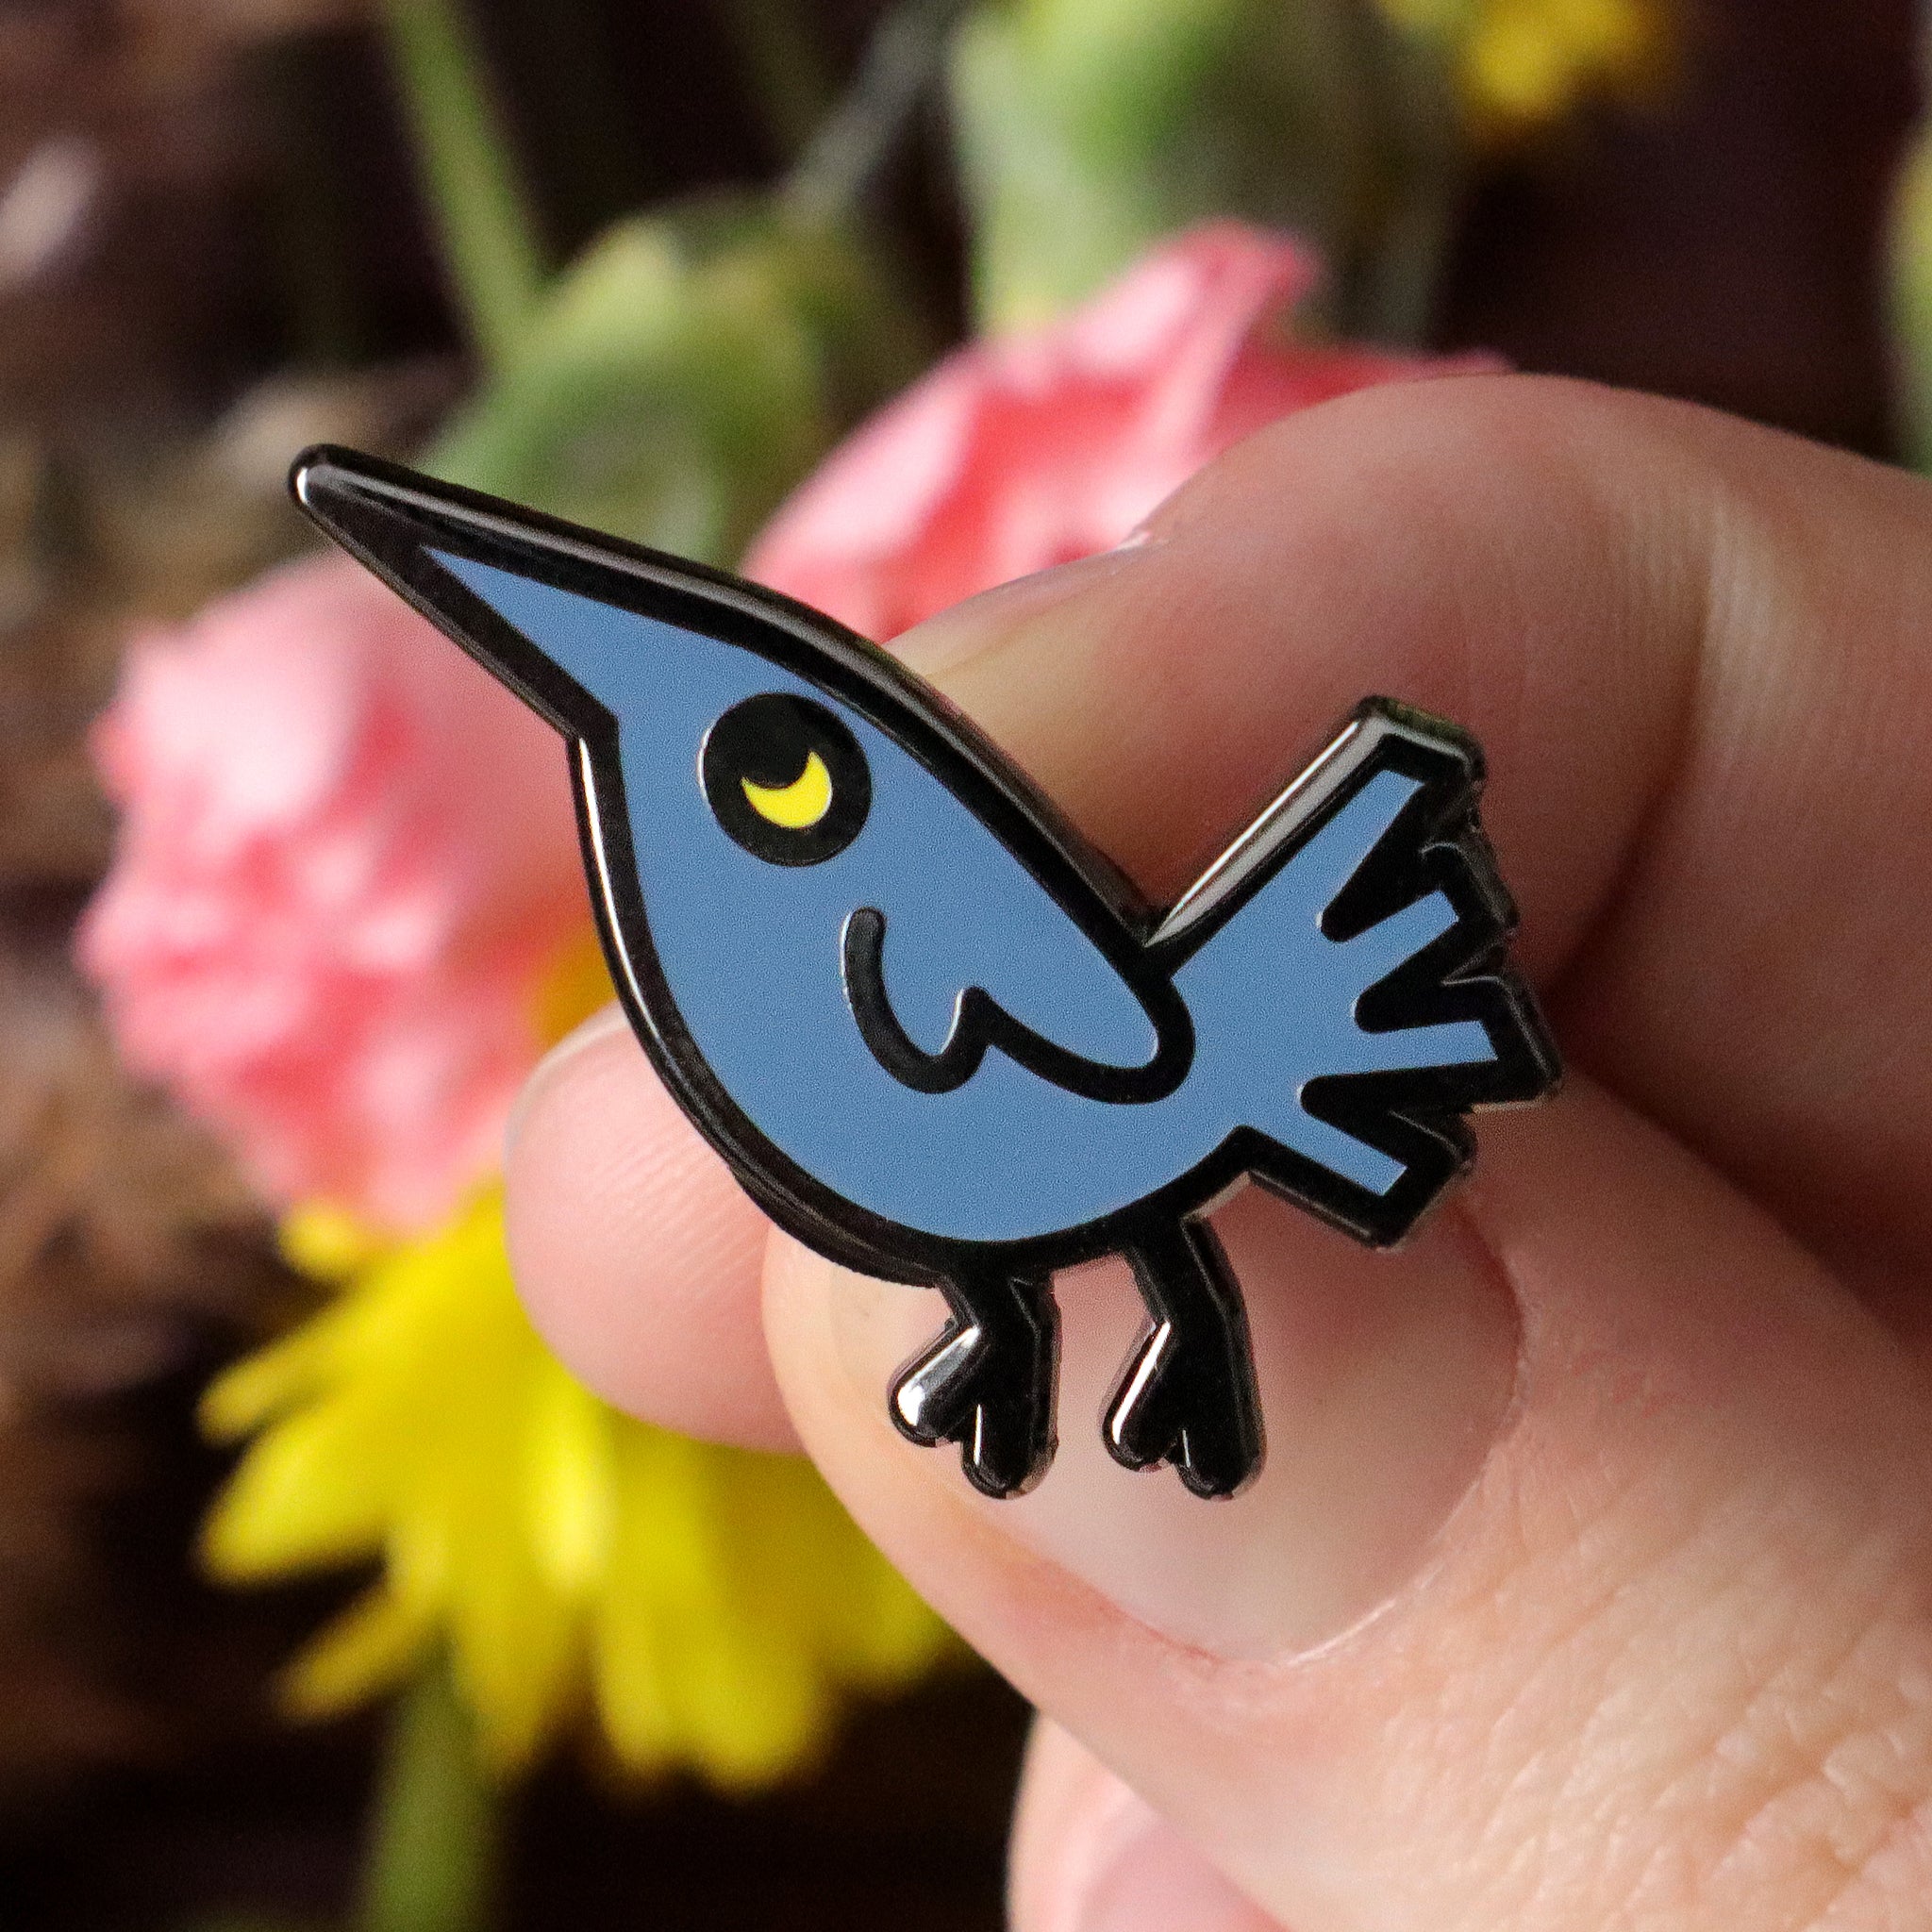 Frog with a Scarf - Enamel Pin – JelArts